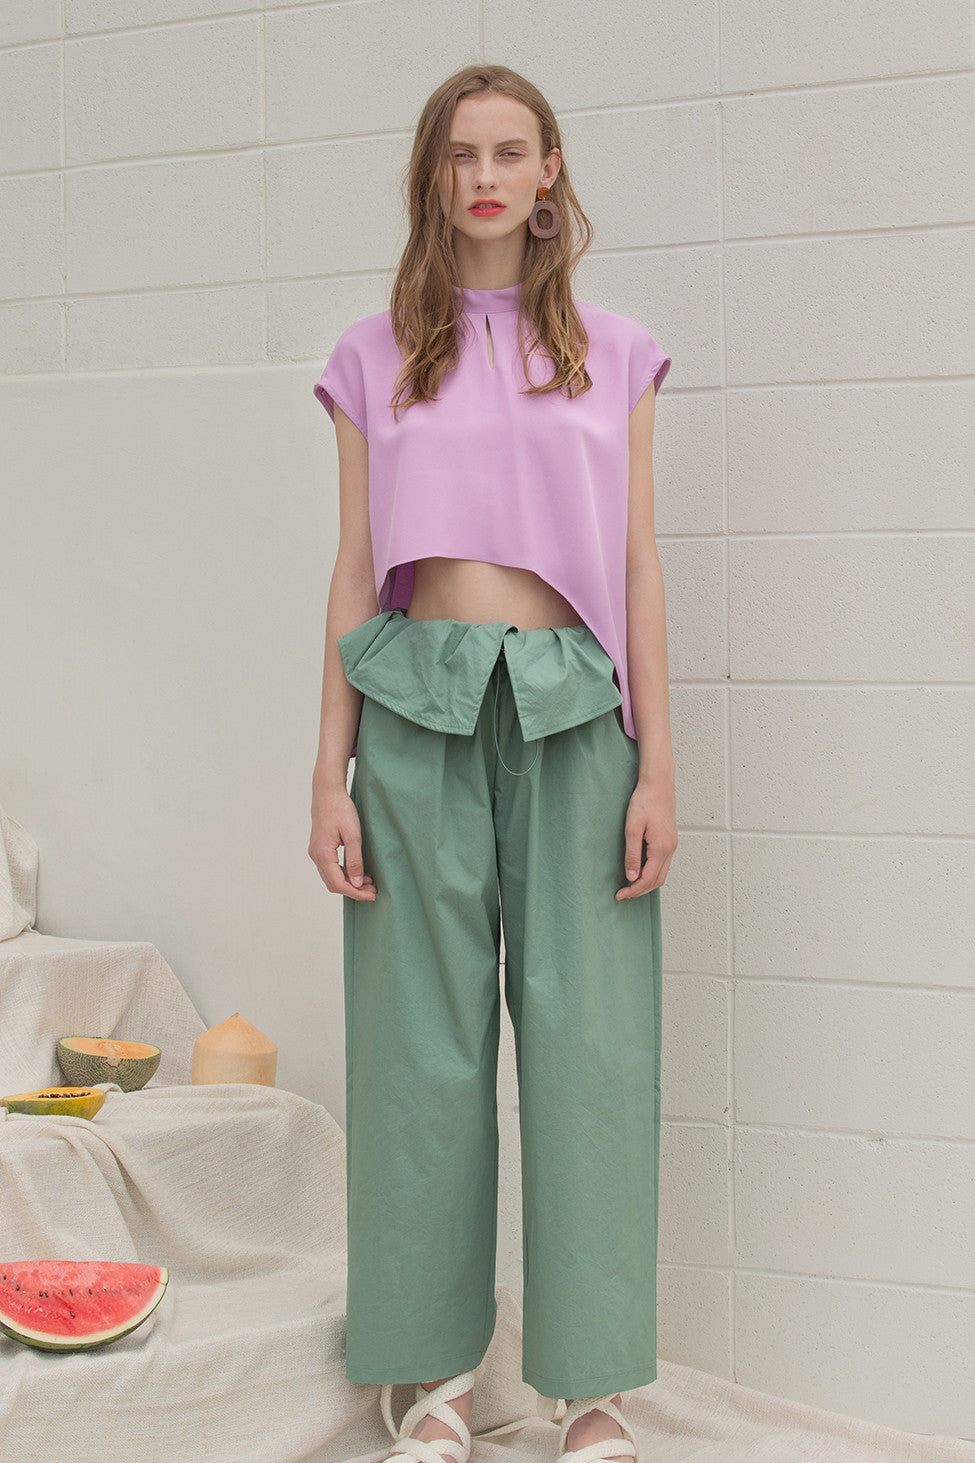 The Lassie Pant in pale green featuring elastic waistband, two slant pockets. Lightweight.